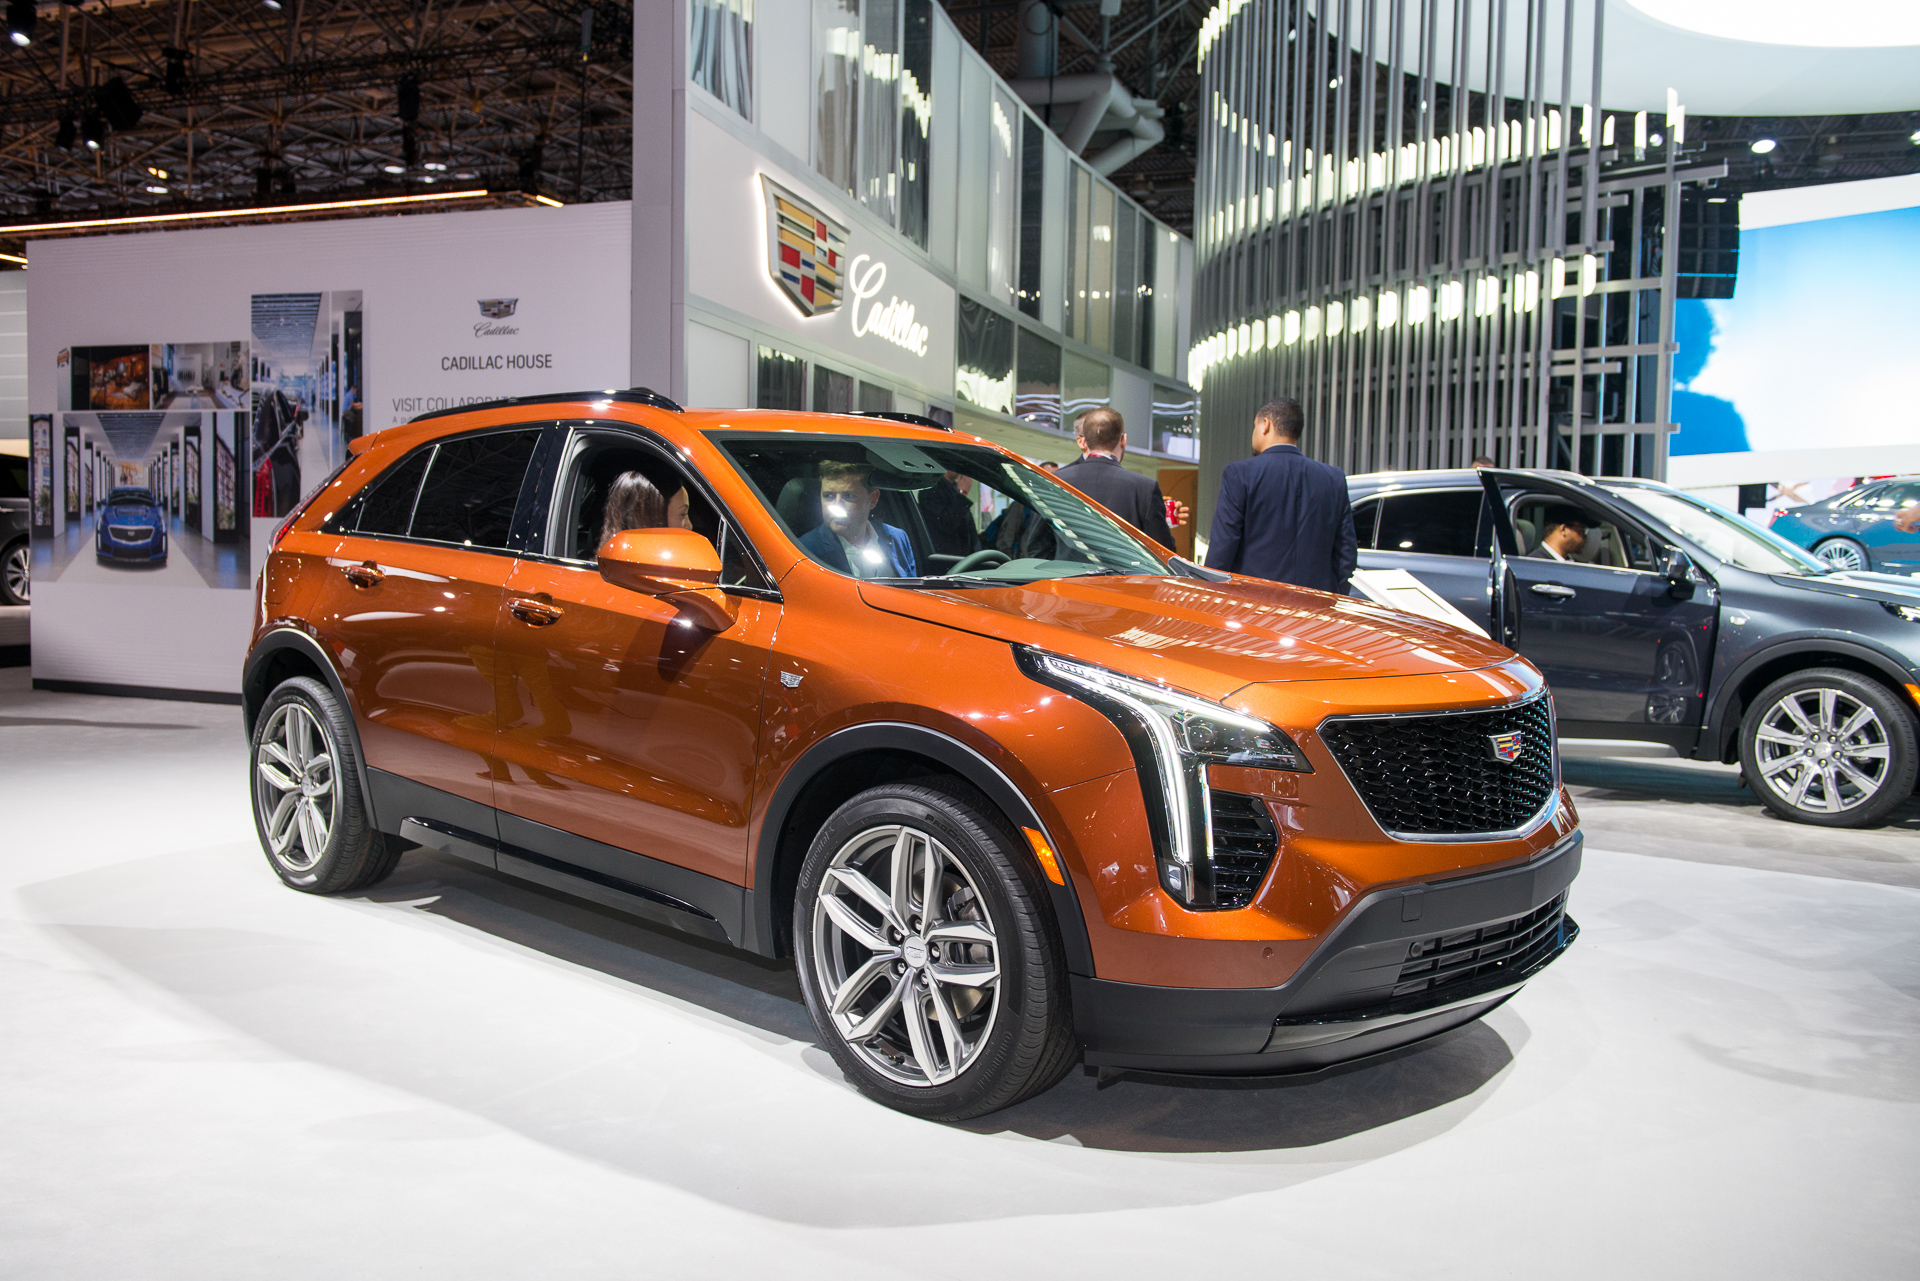 19 Cadillac Xt4 Crossover Suv Looks Good Feels Like More Of The Same